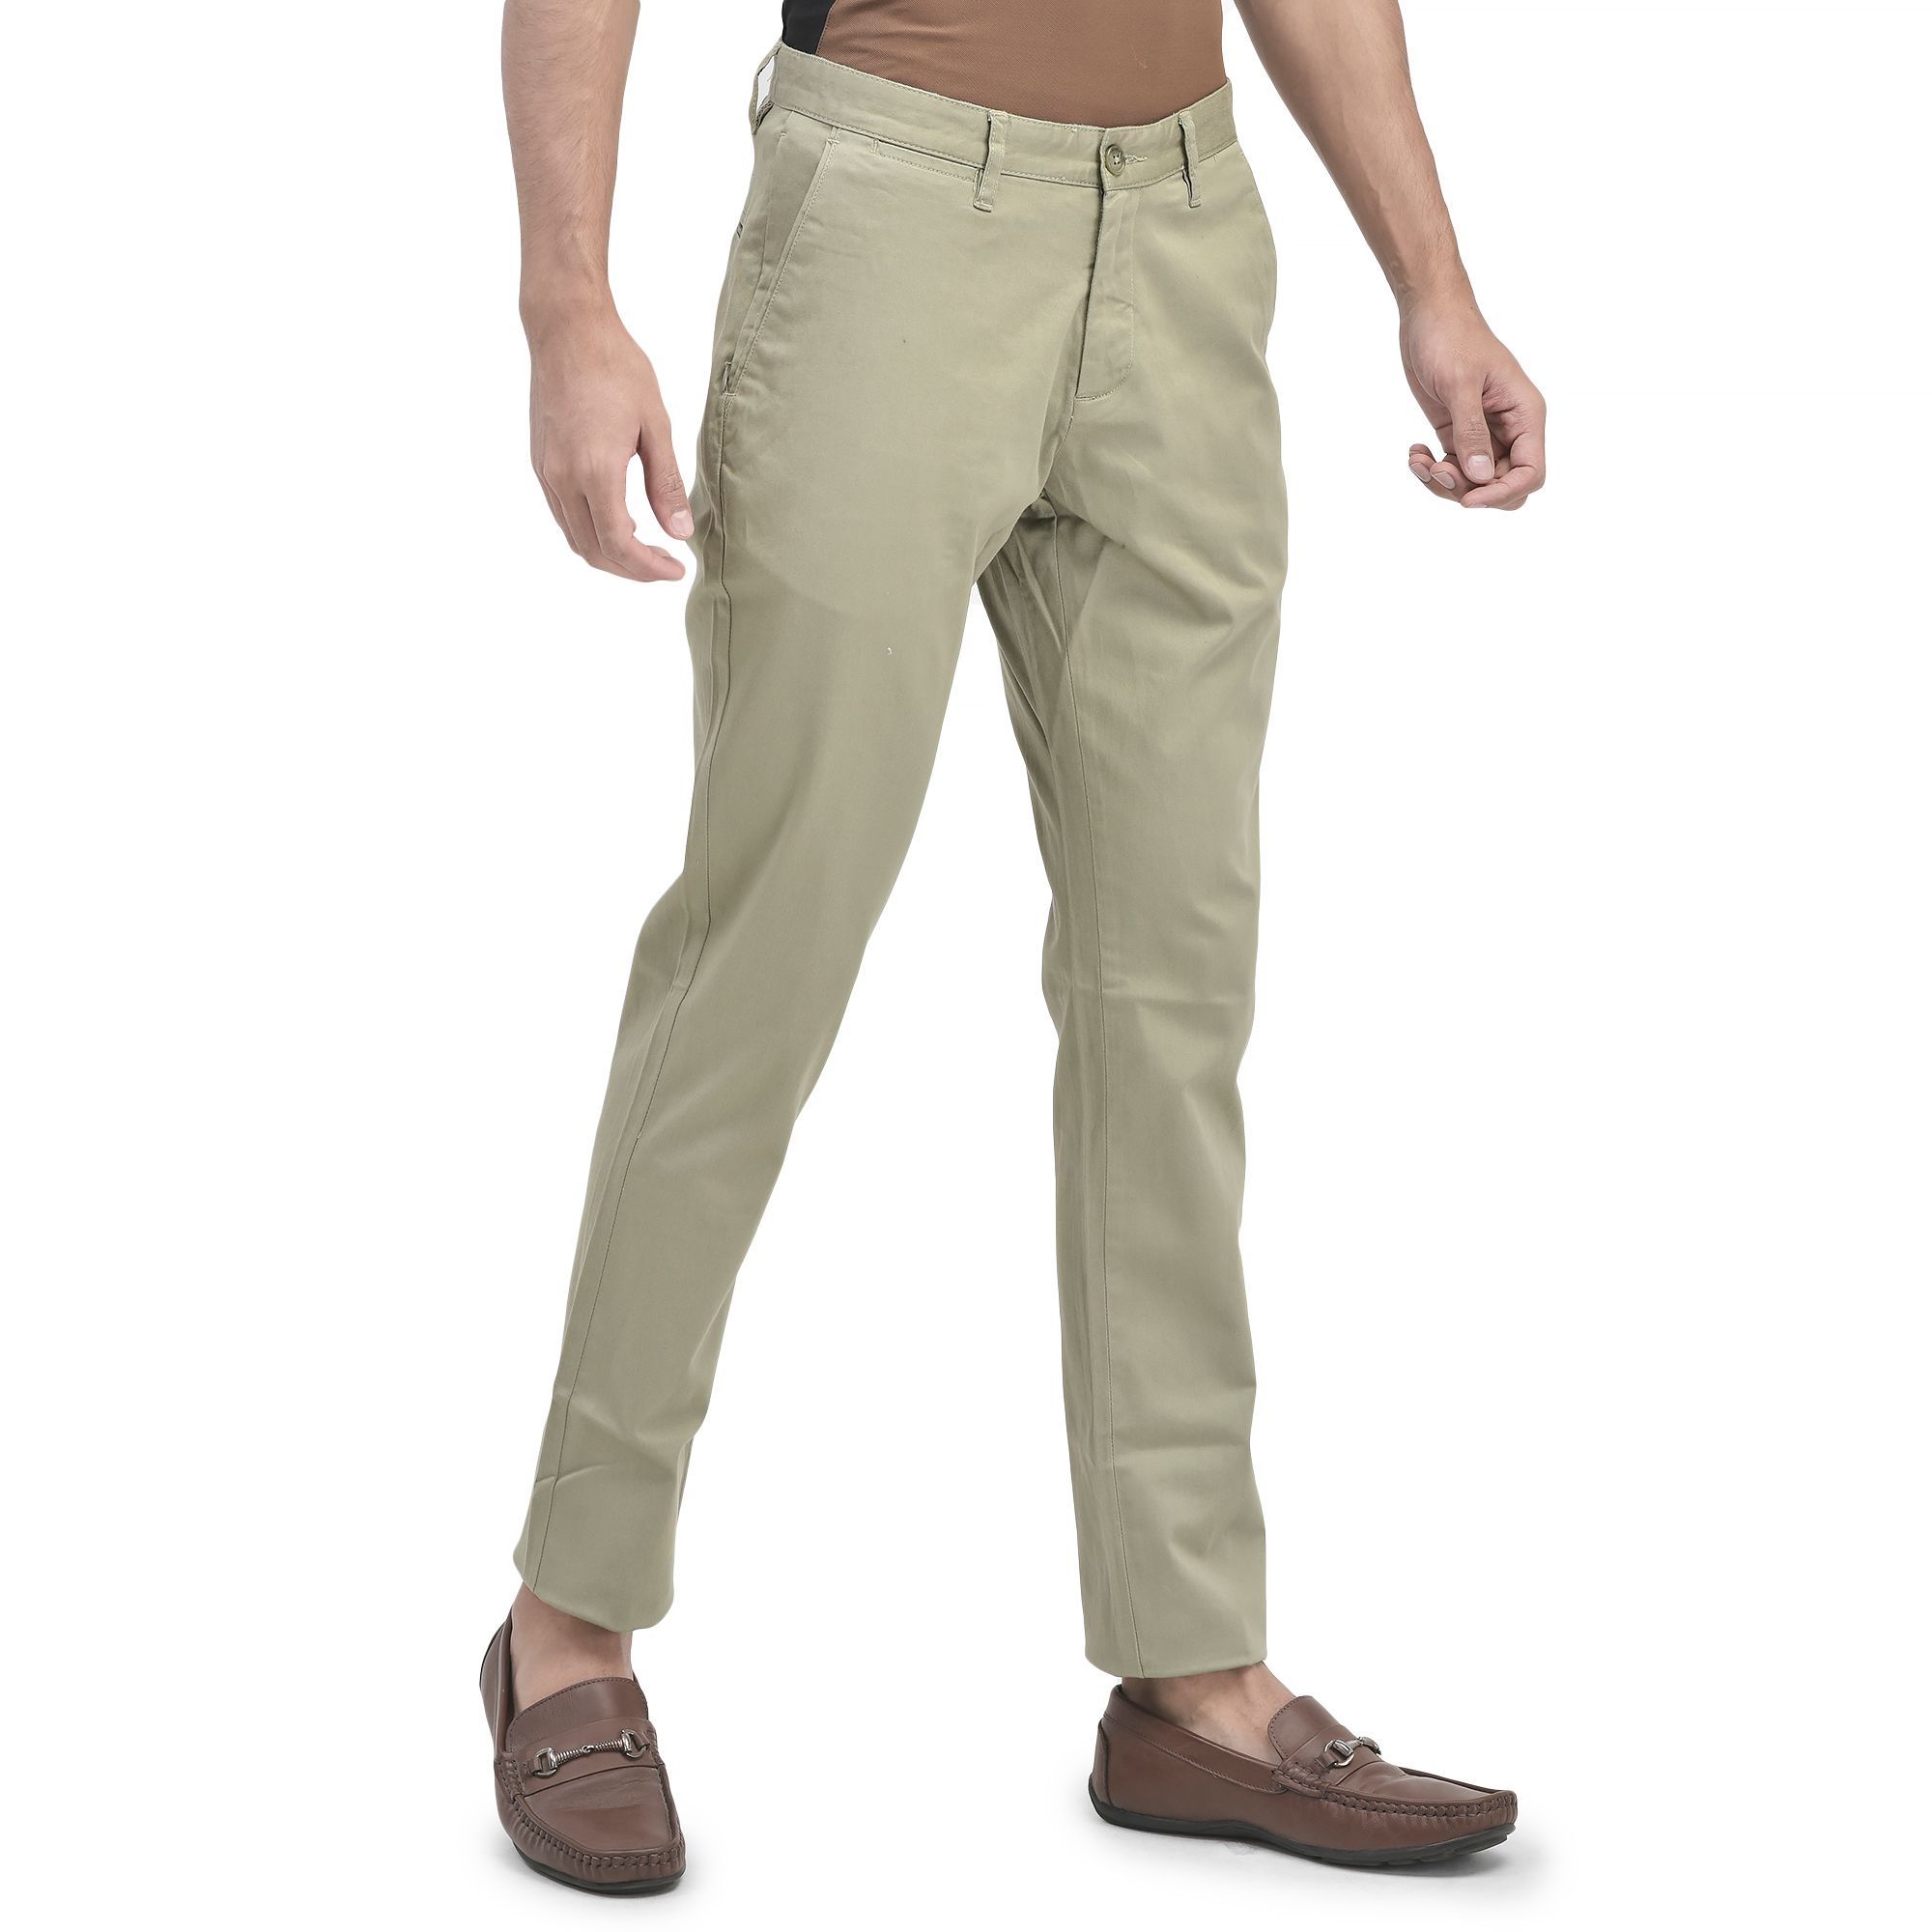 Lolive Chinos for Men